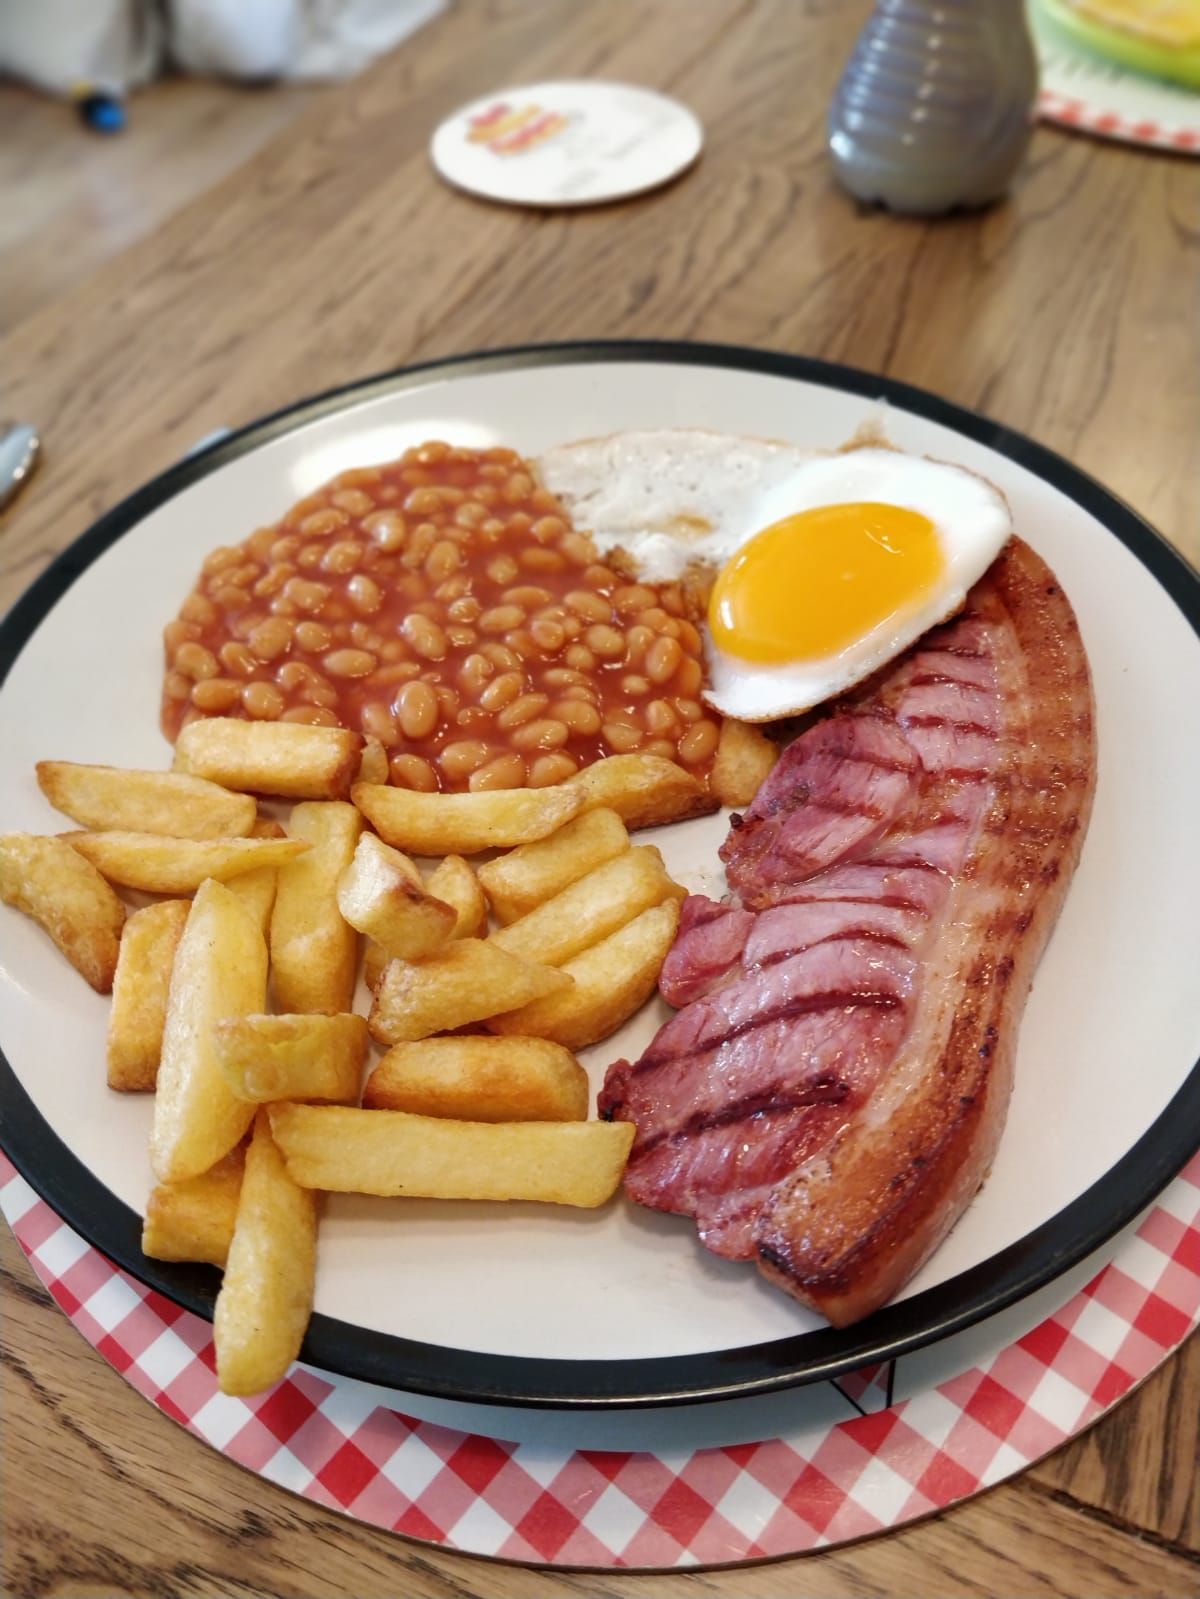 Gammon, egg, chips and beans meal